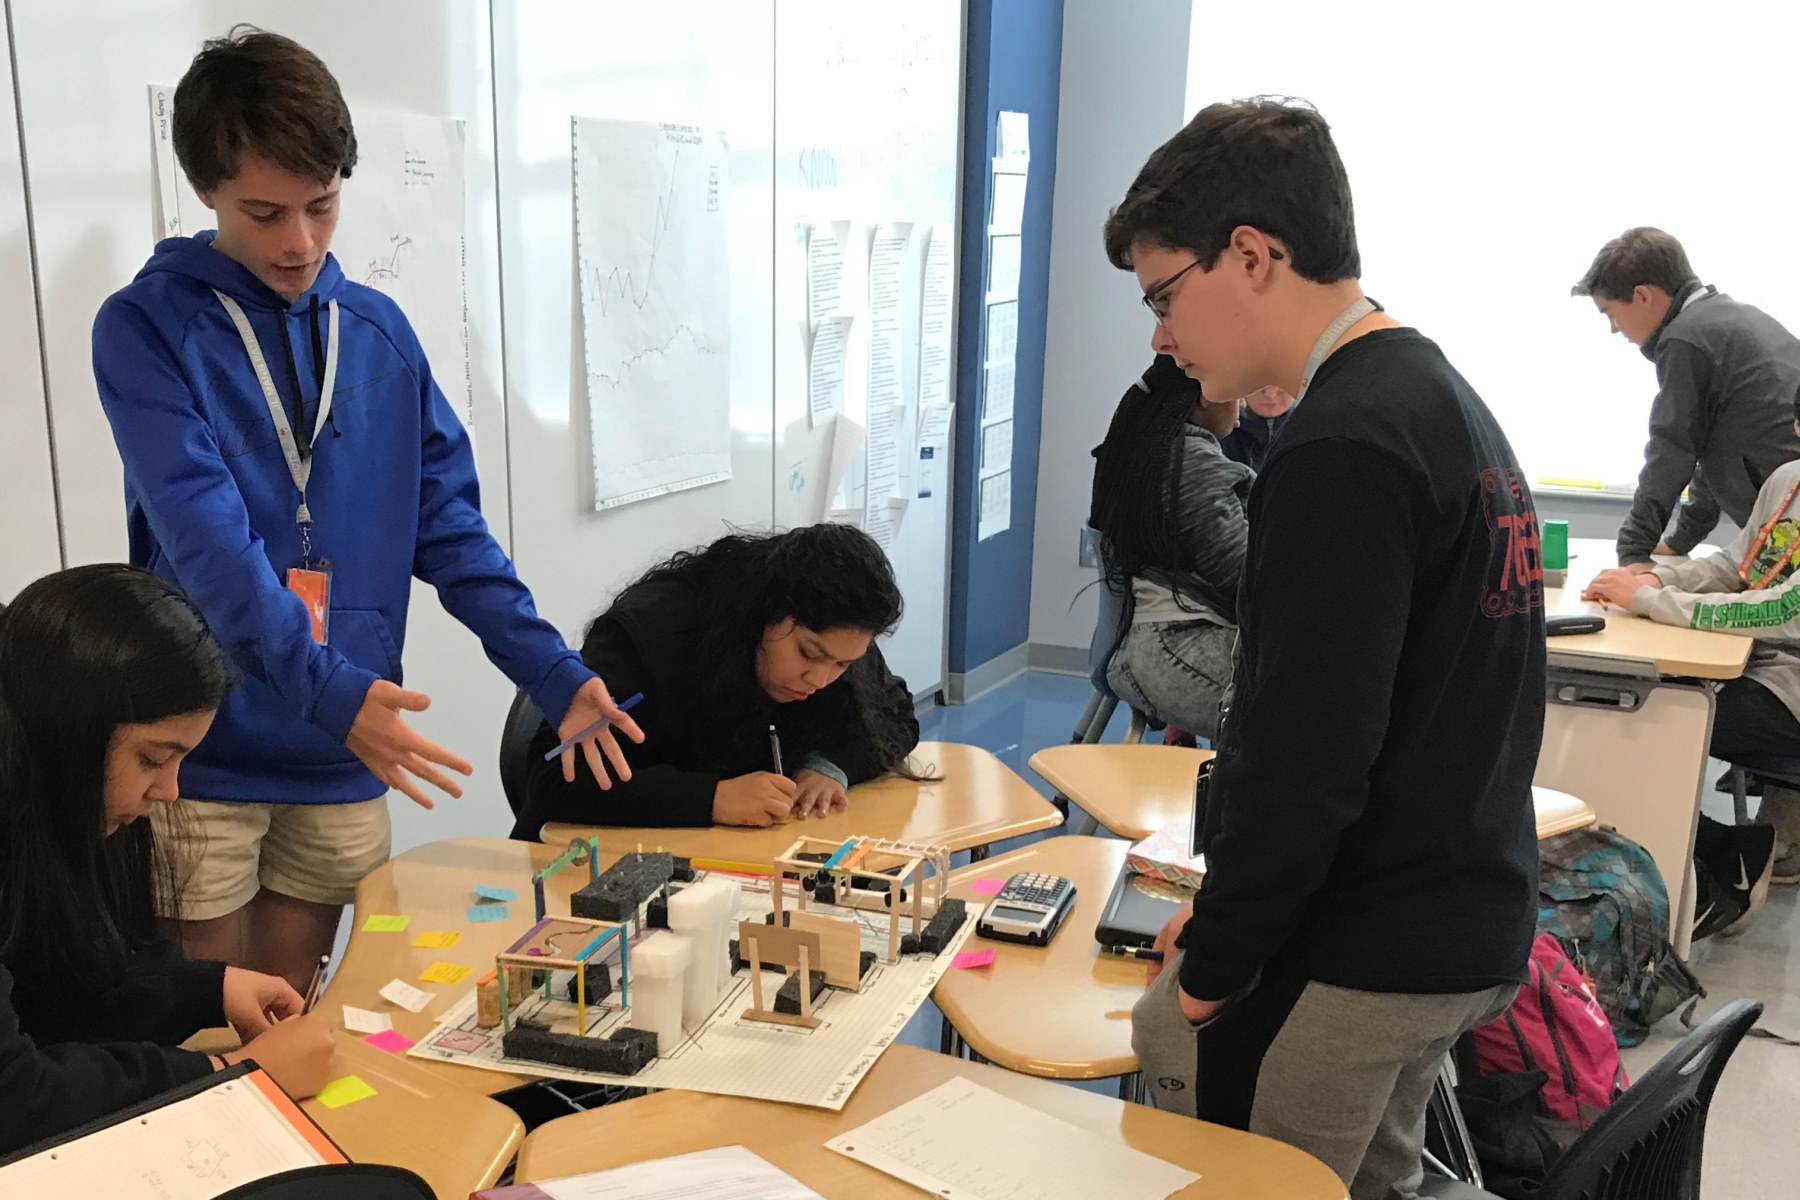 A group of high schools students working on a robotics project